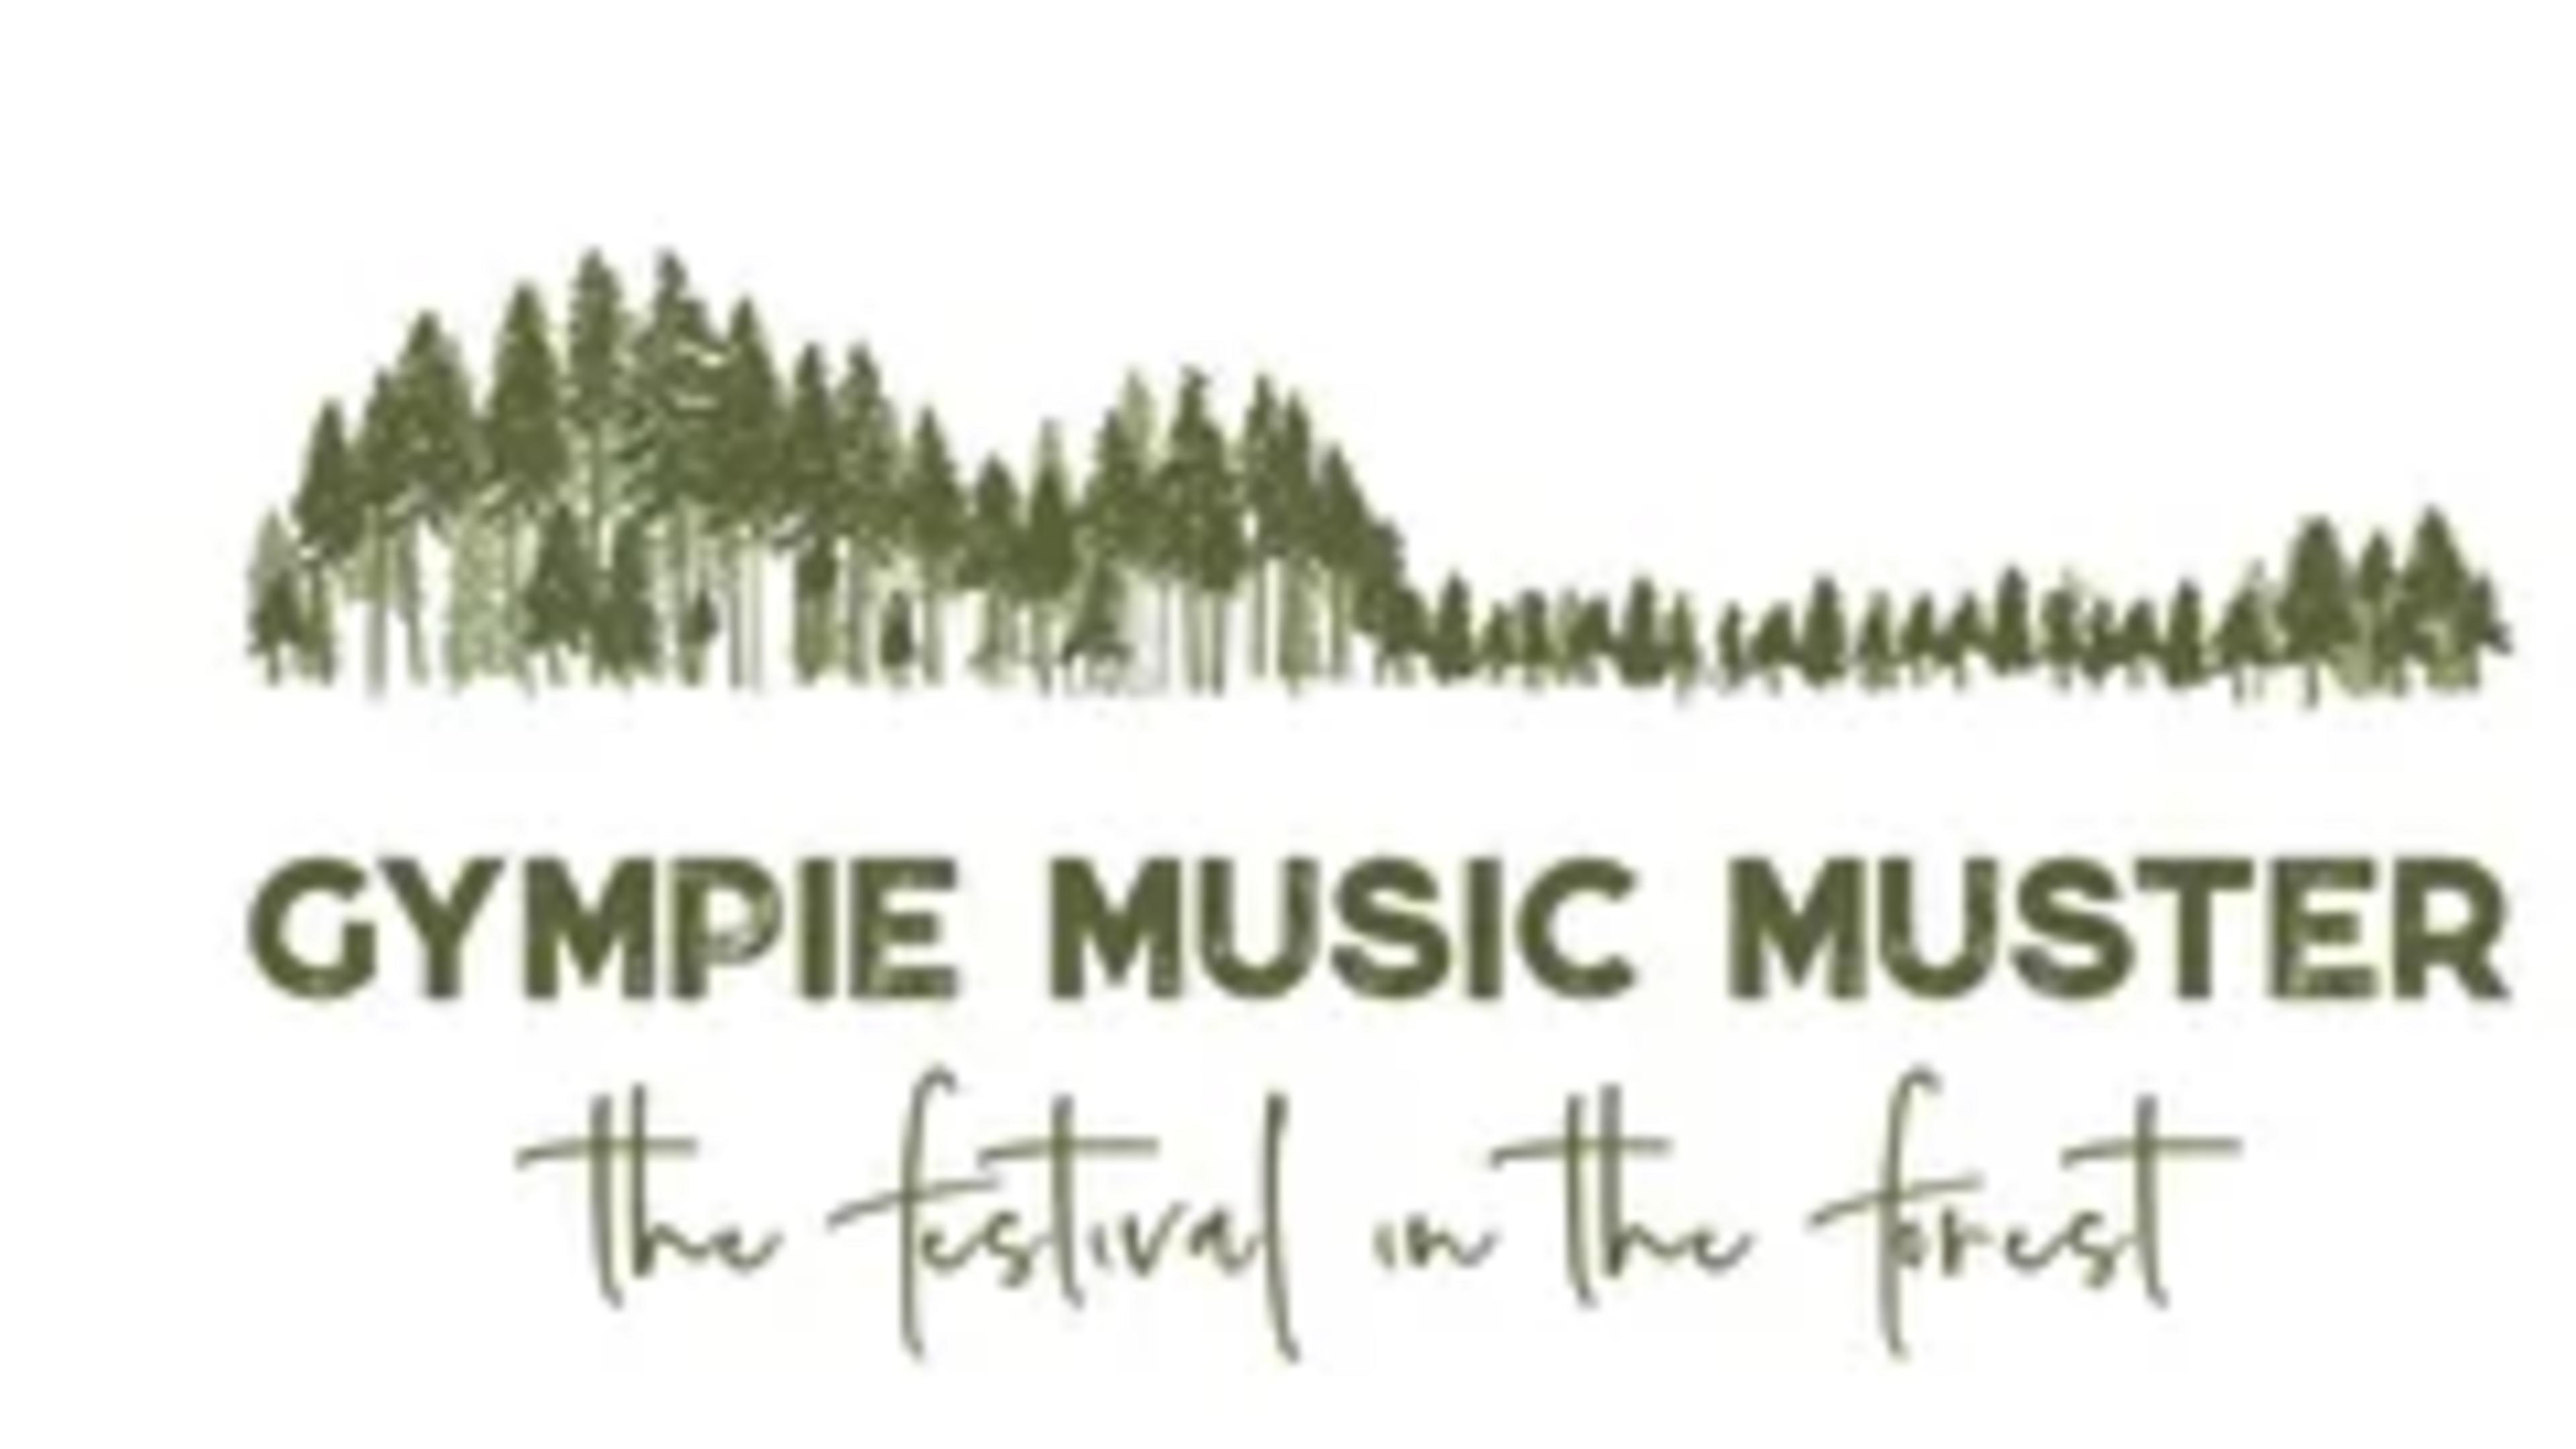  Gympie Music Muster Image